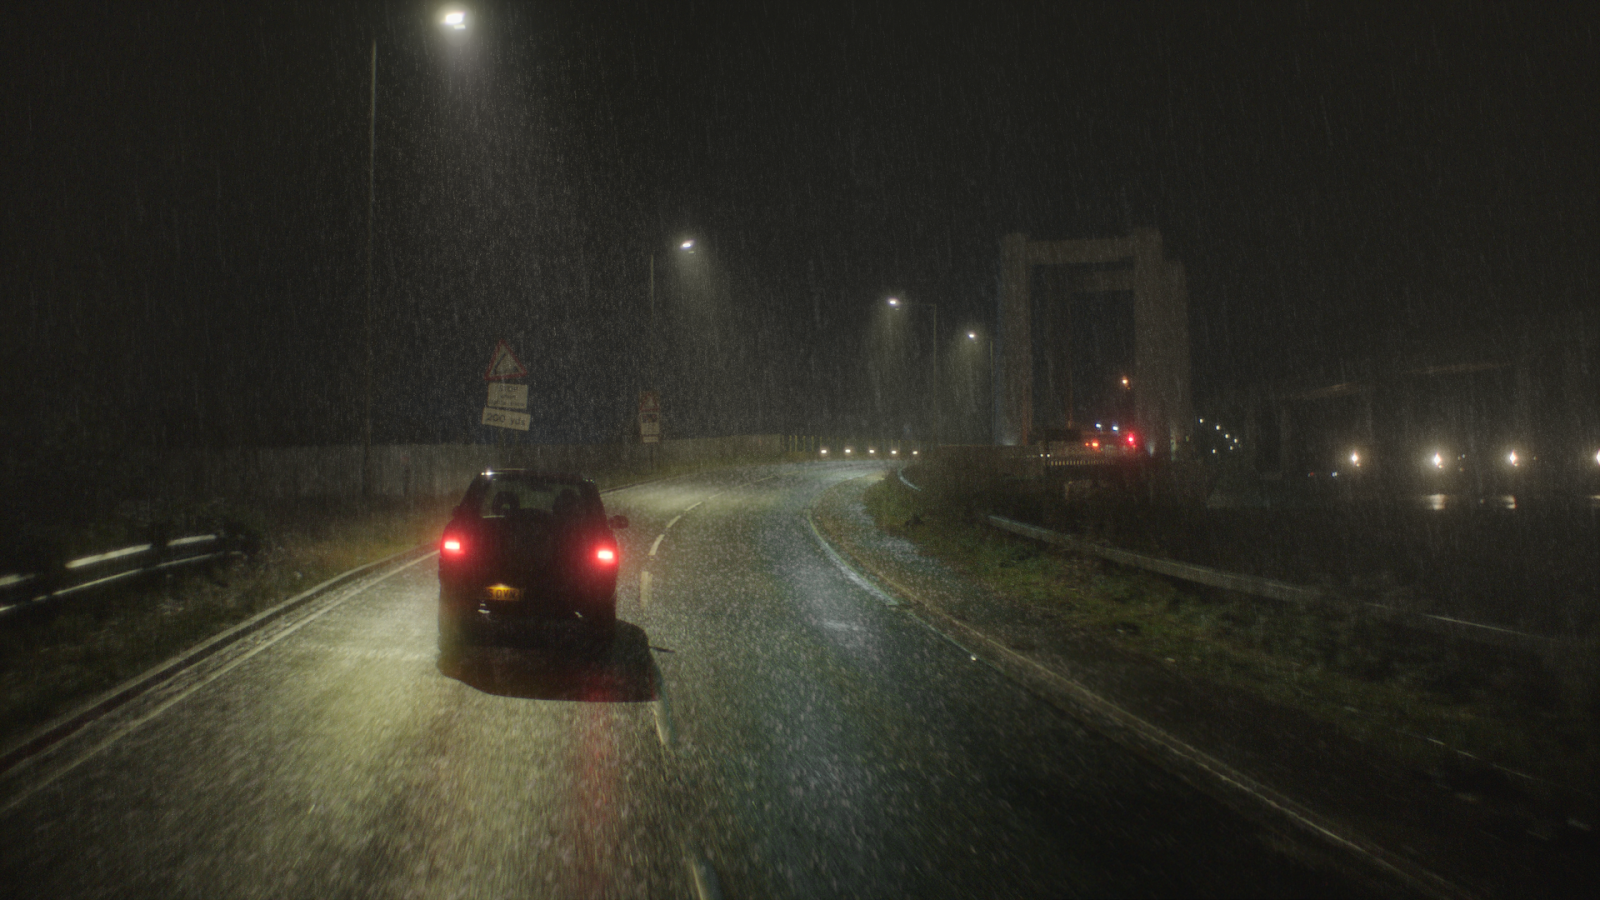 Final shot of the car driving up to the bridge in the simulated rain for ITV's Too Close. 